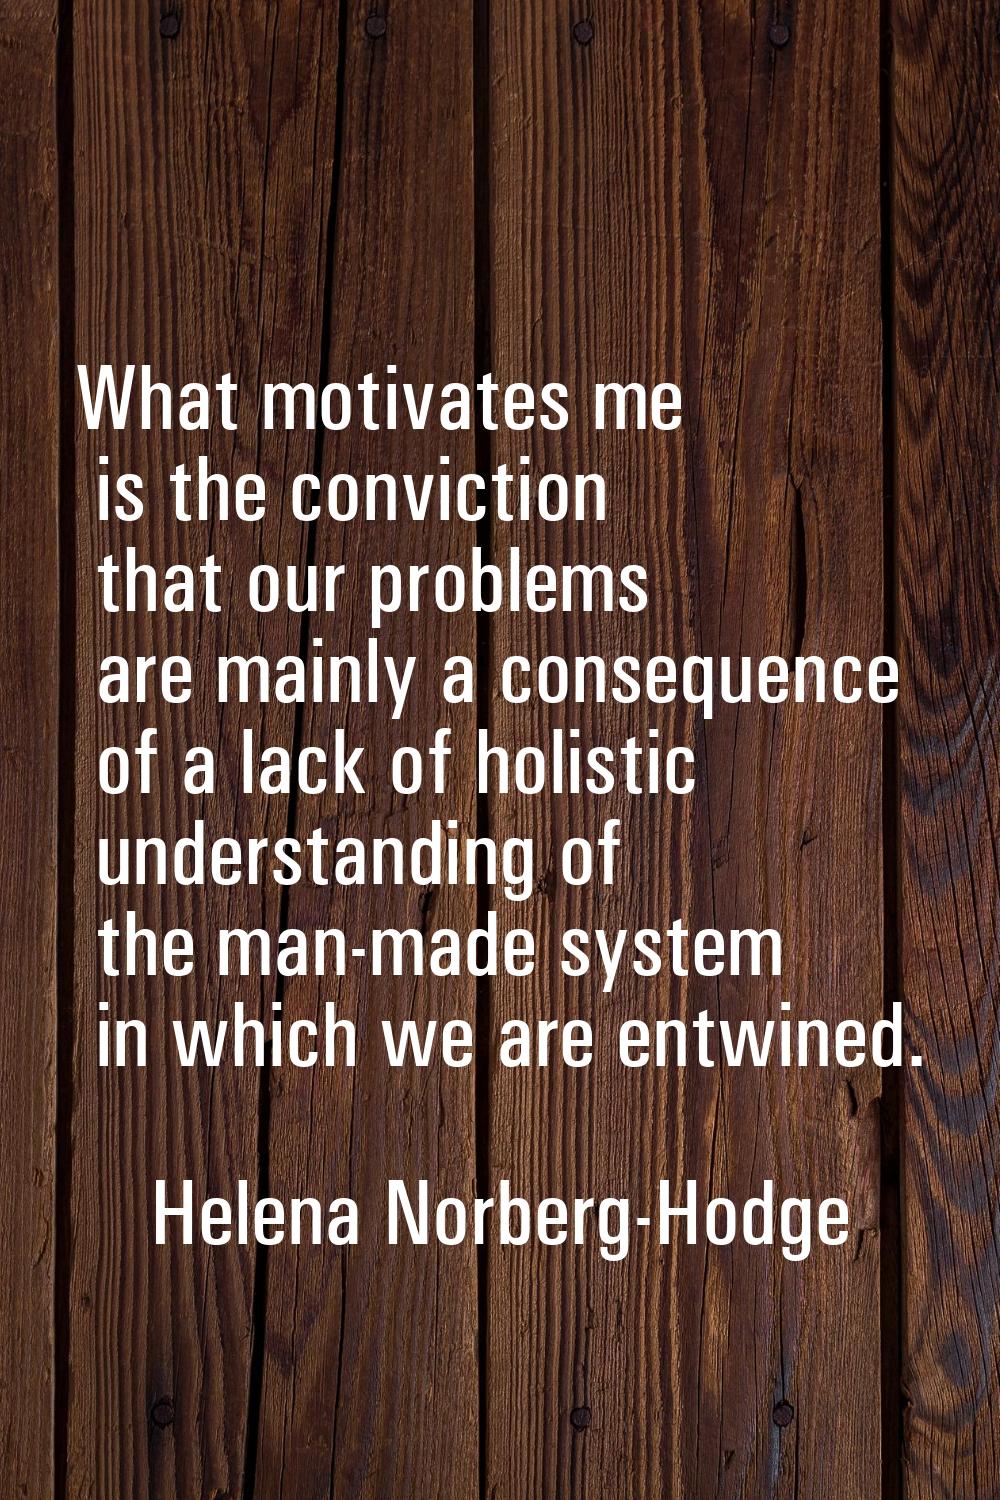 What motivates me is the conviction that our problems are mainly a consequence of a lack of holisti